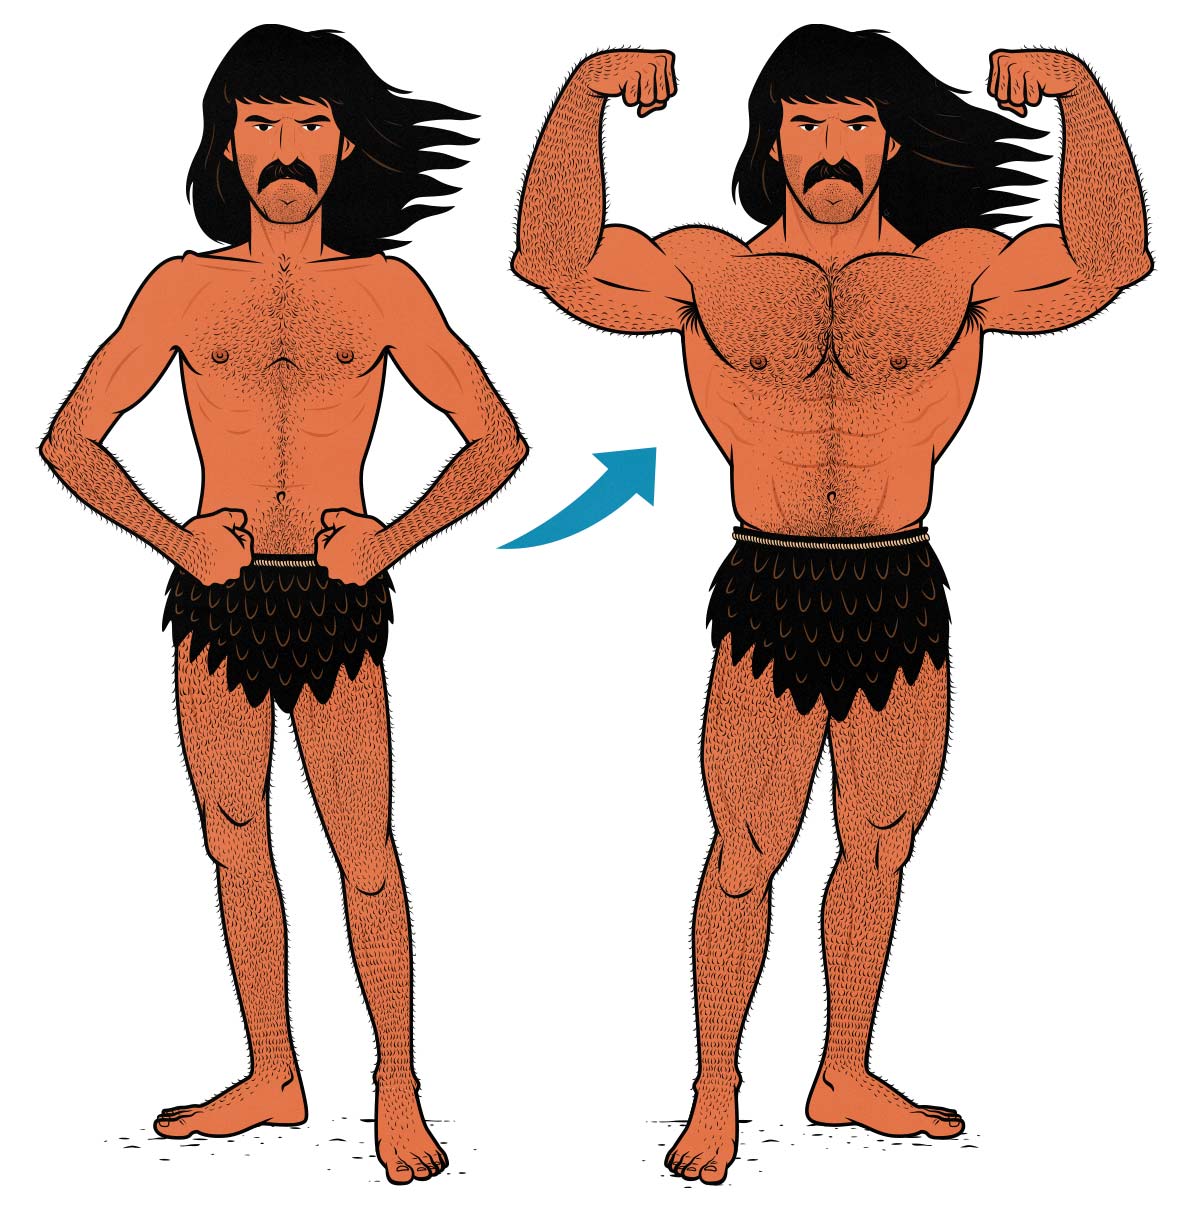 A skinny barbarian bulking up and becoming muscular. Illustrated by Shane Duquette.